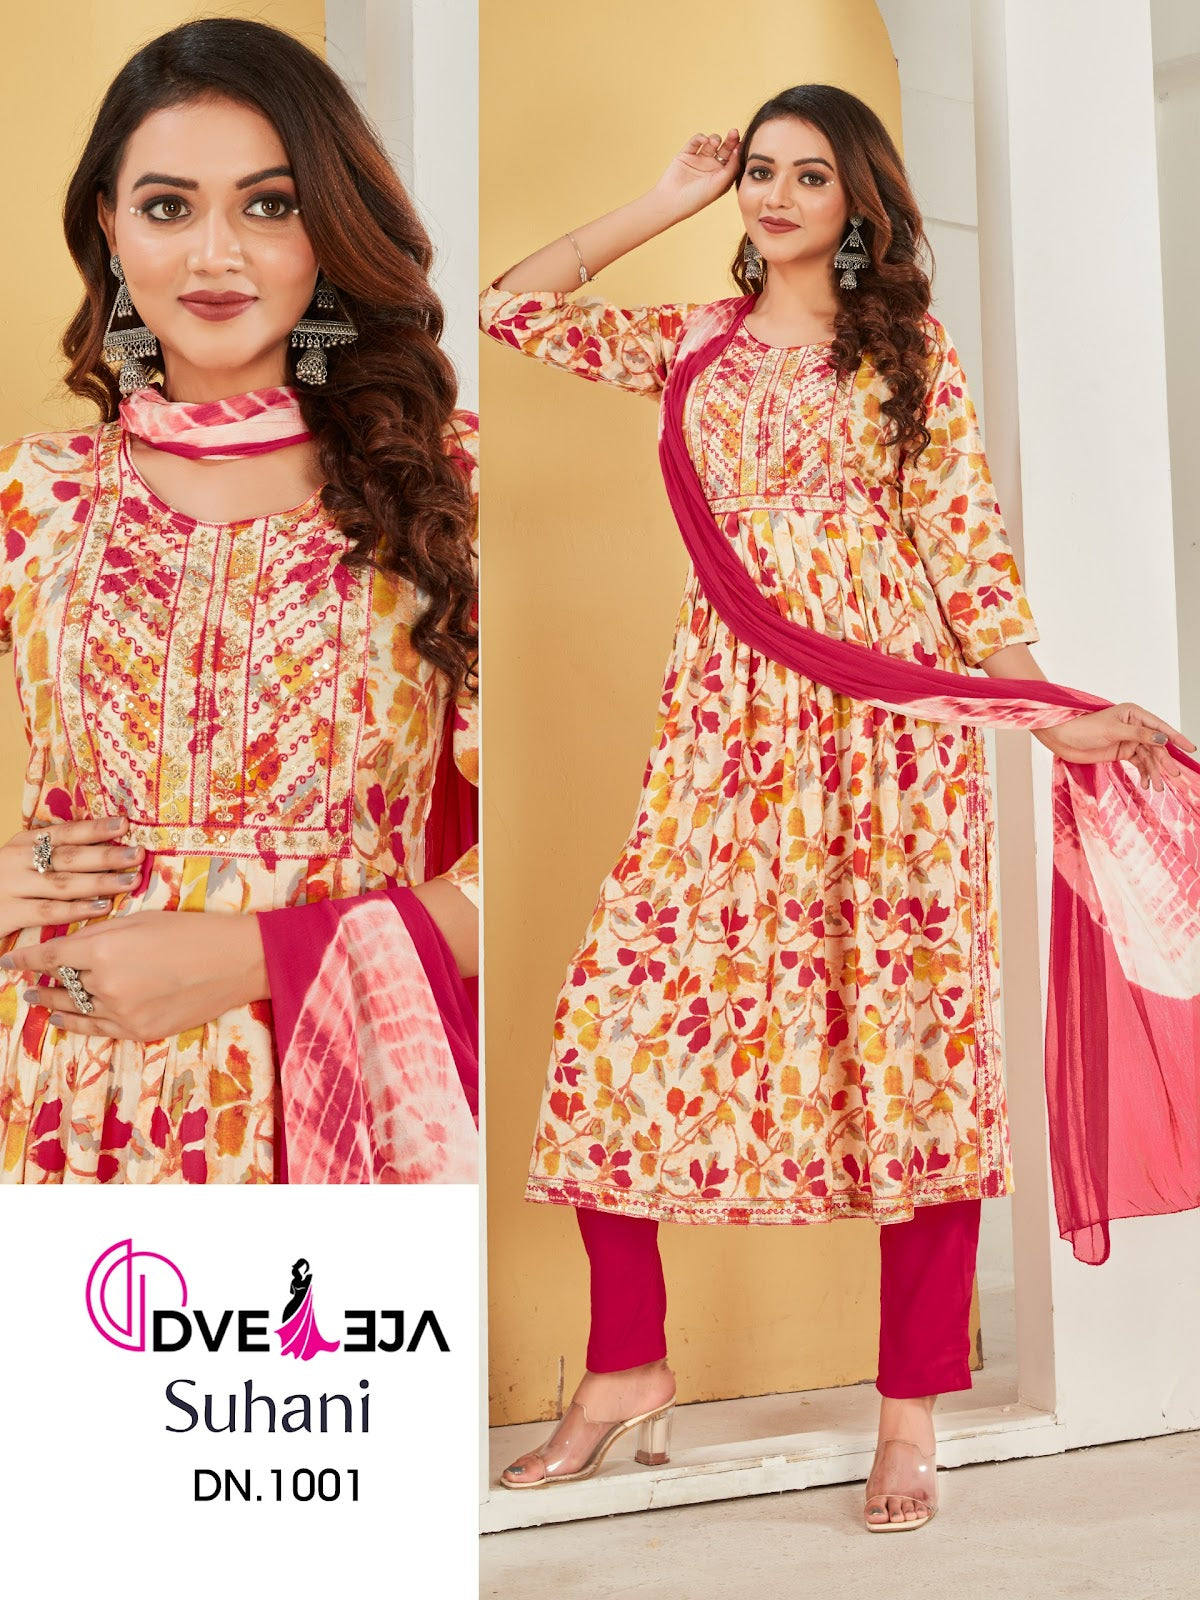 Suhaani Dveeja Fashion Rayon Readymade Pant Style Suits